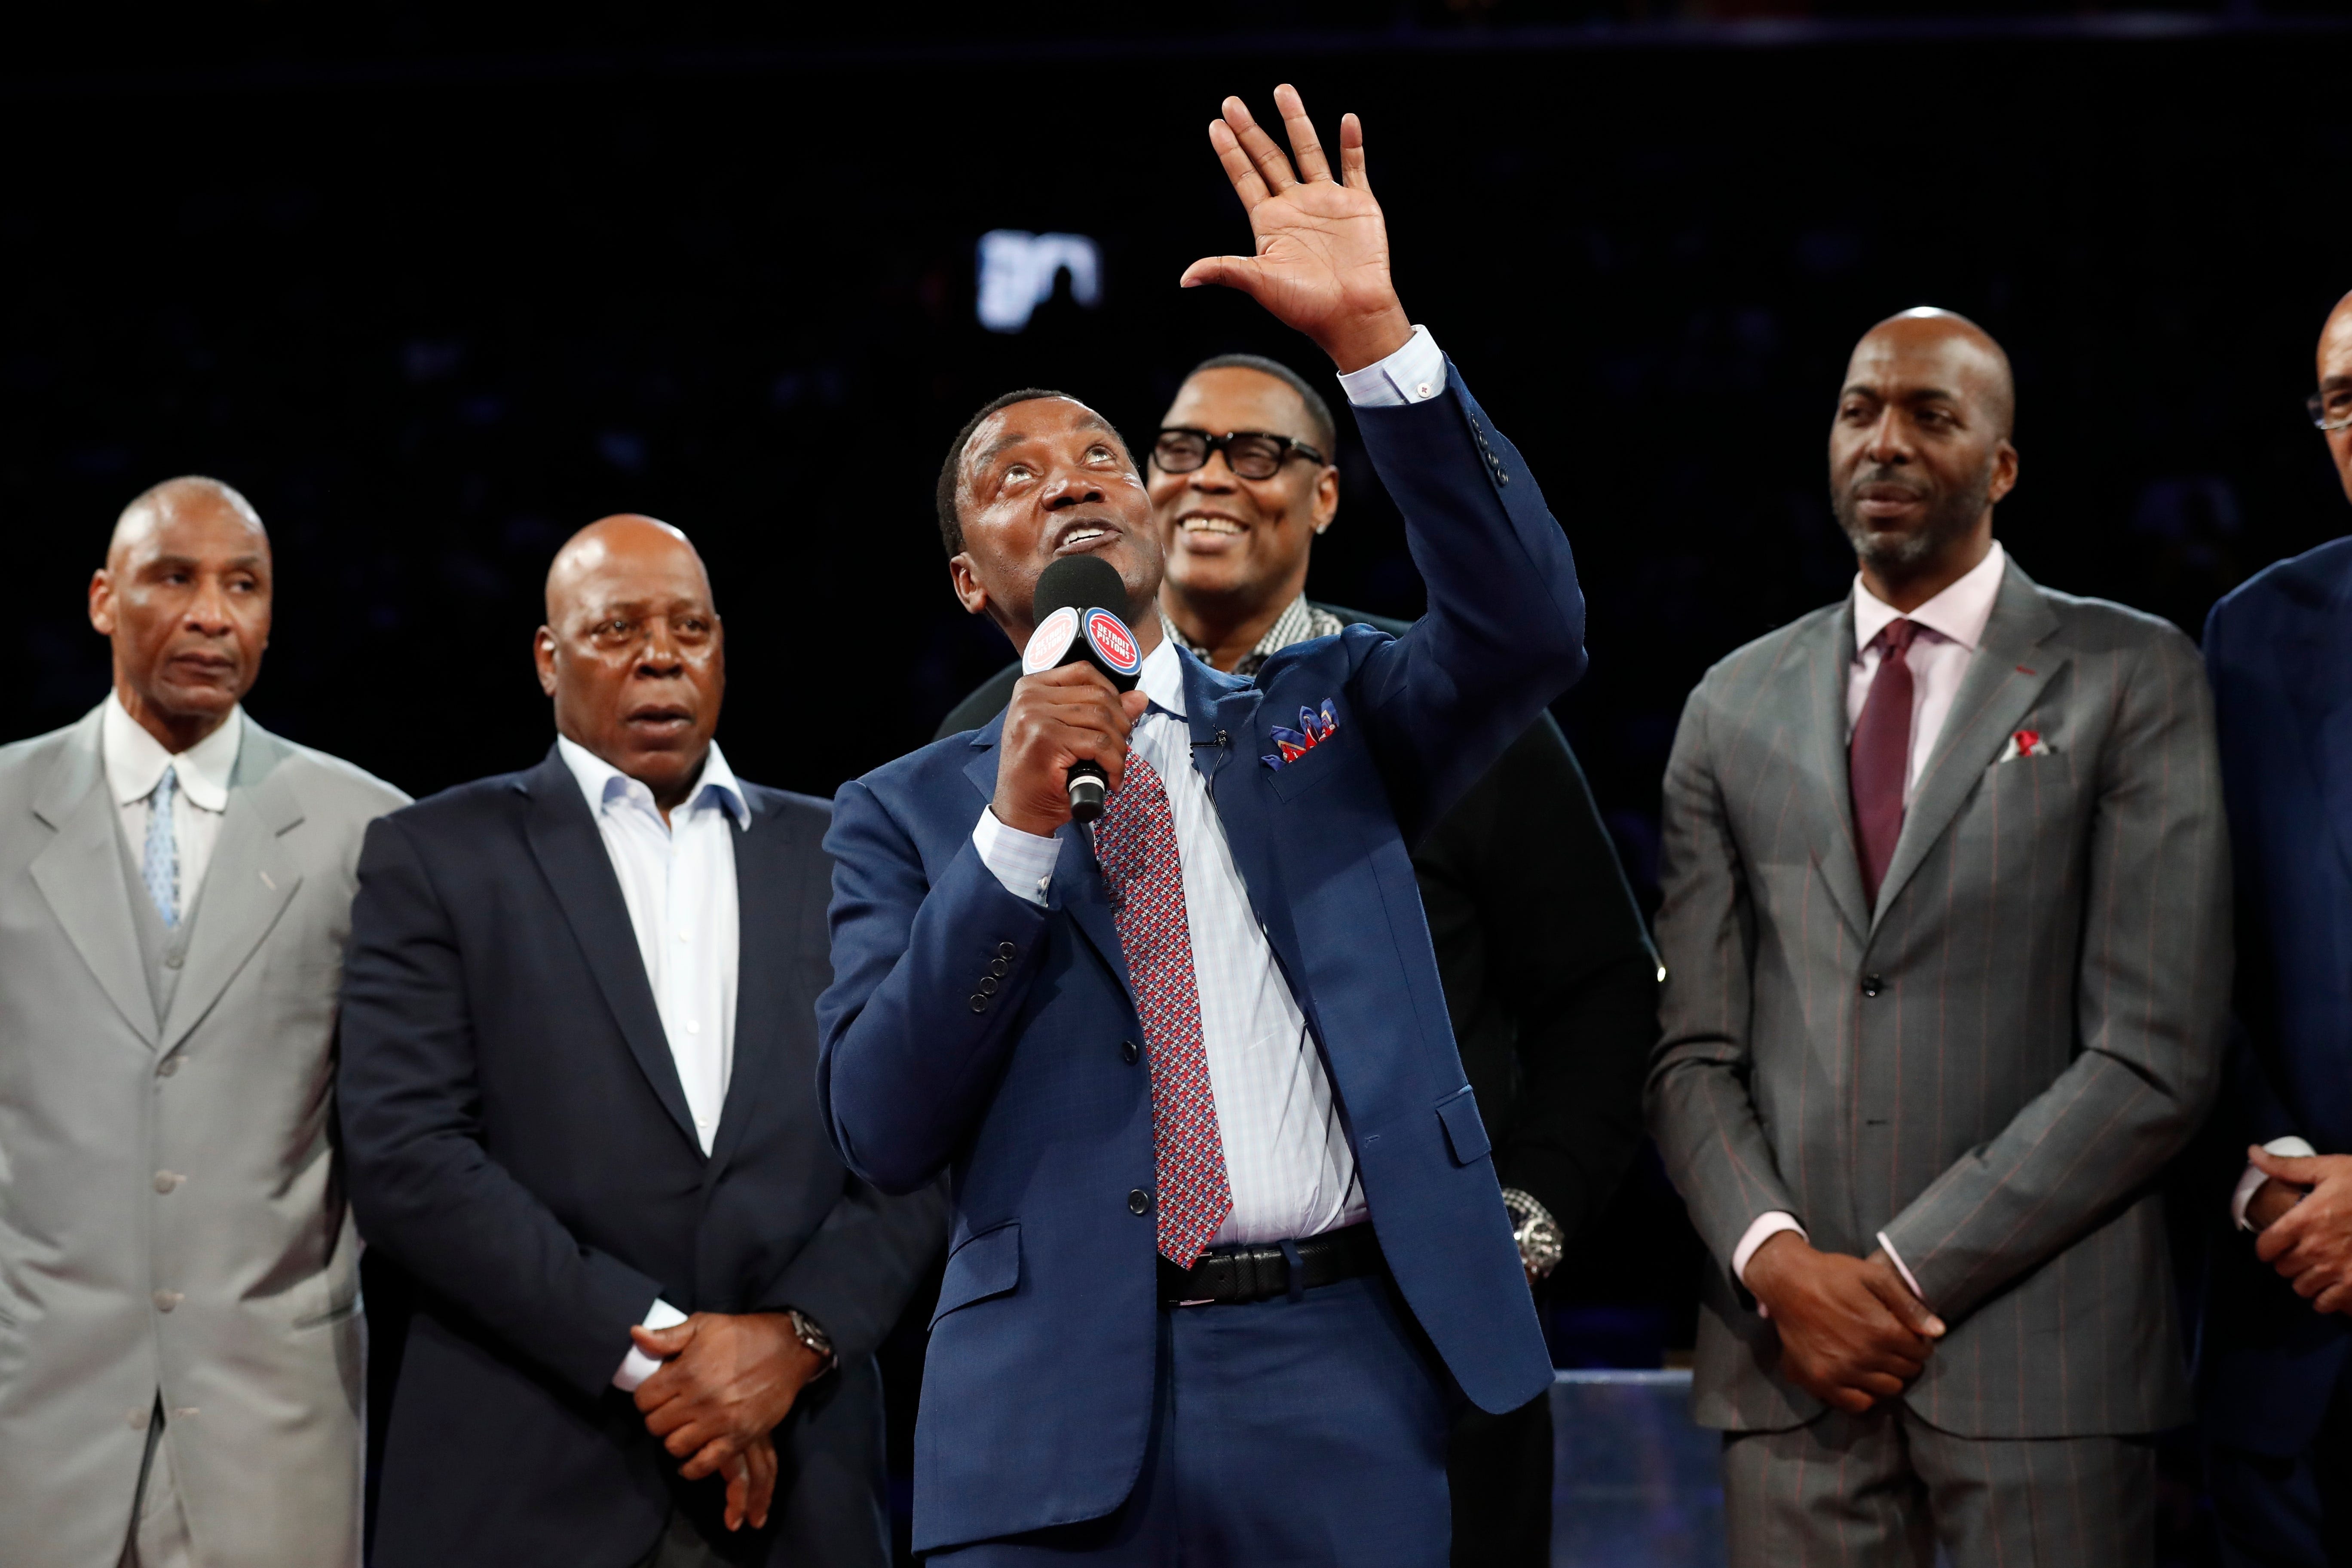 Former Pistons player Isiah Thomas disputes ex-coach Stan Van Gundy's belief the culture needed to change.